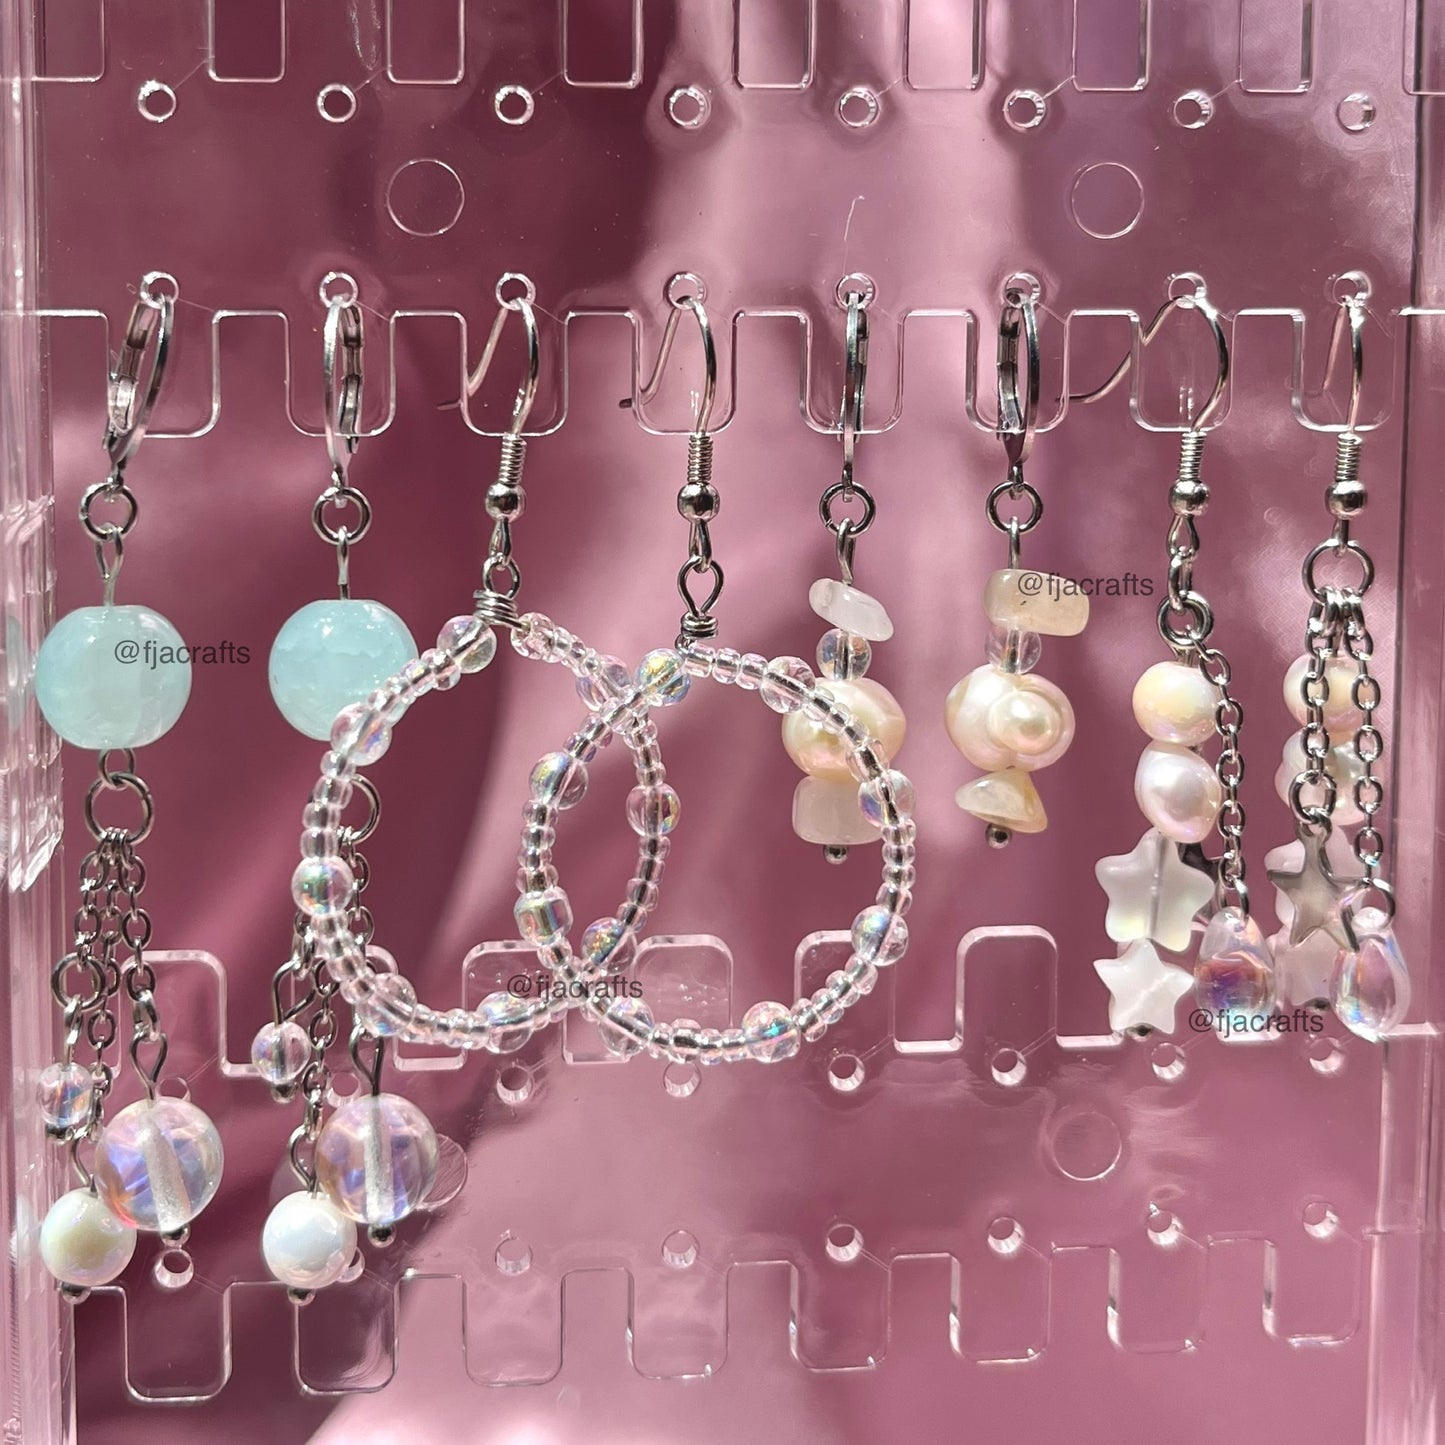 Bubbles & Pearls Dangle Earrings | Atlantica Collection FJA Crafts